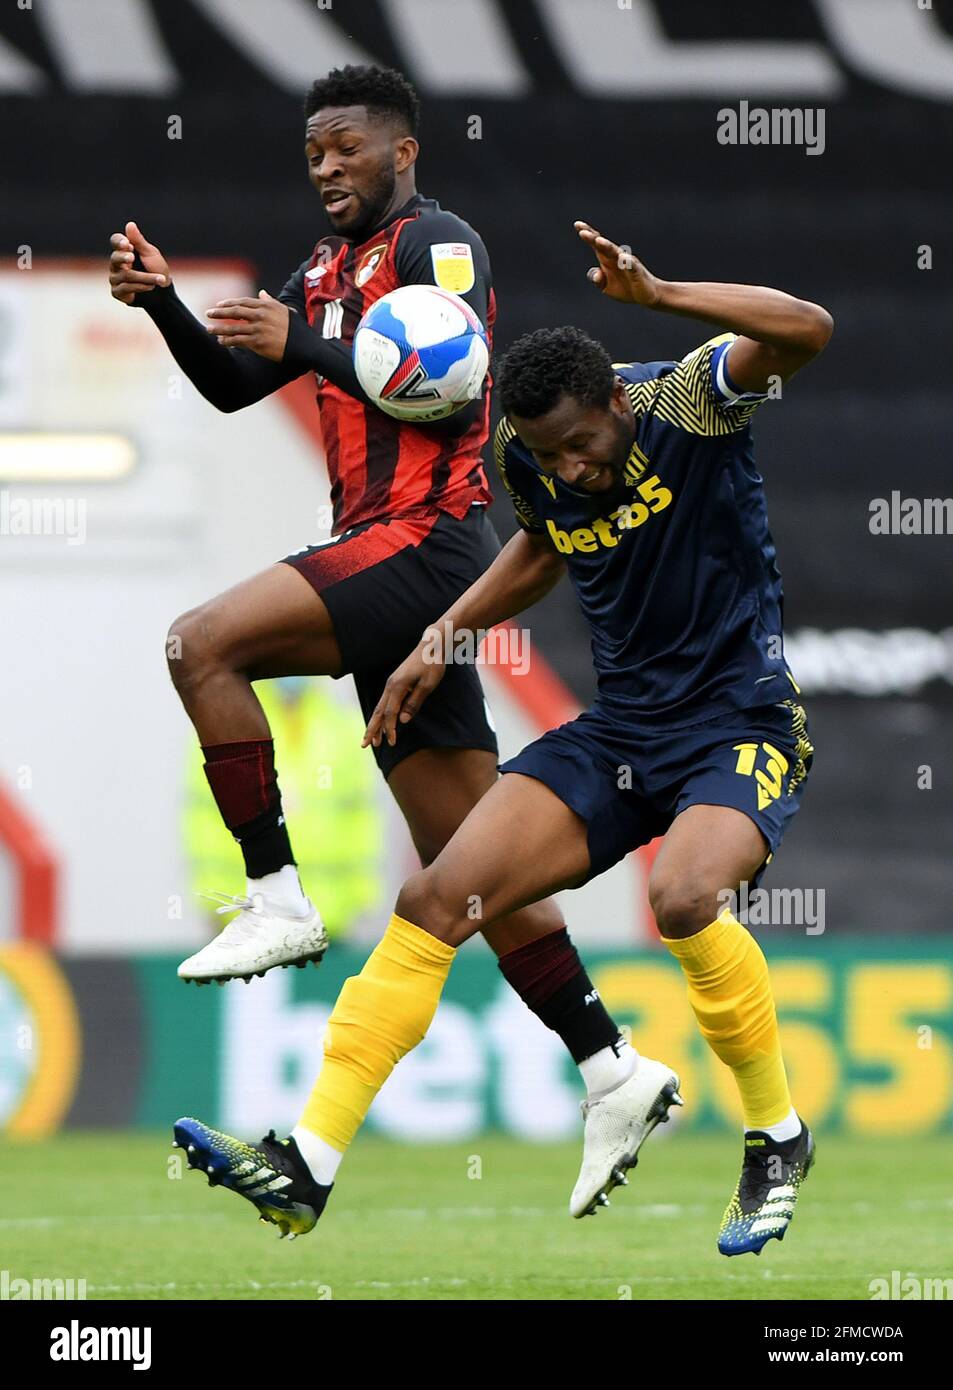 Jefferson Lerma of AFC Bournemouth and John Obi Mikel of Stoke City - AFC Bournemouth v Stoke City, Sky Bet Championship, Vitality Stadium, Bournemouth, UK - 8th May 2021  Editorial Use Only - DataCo restrictions apply Stock Photo